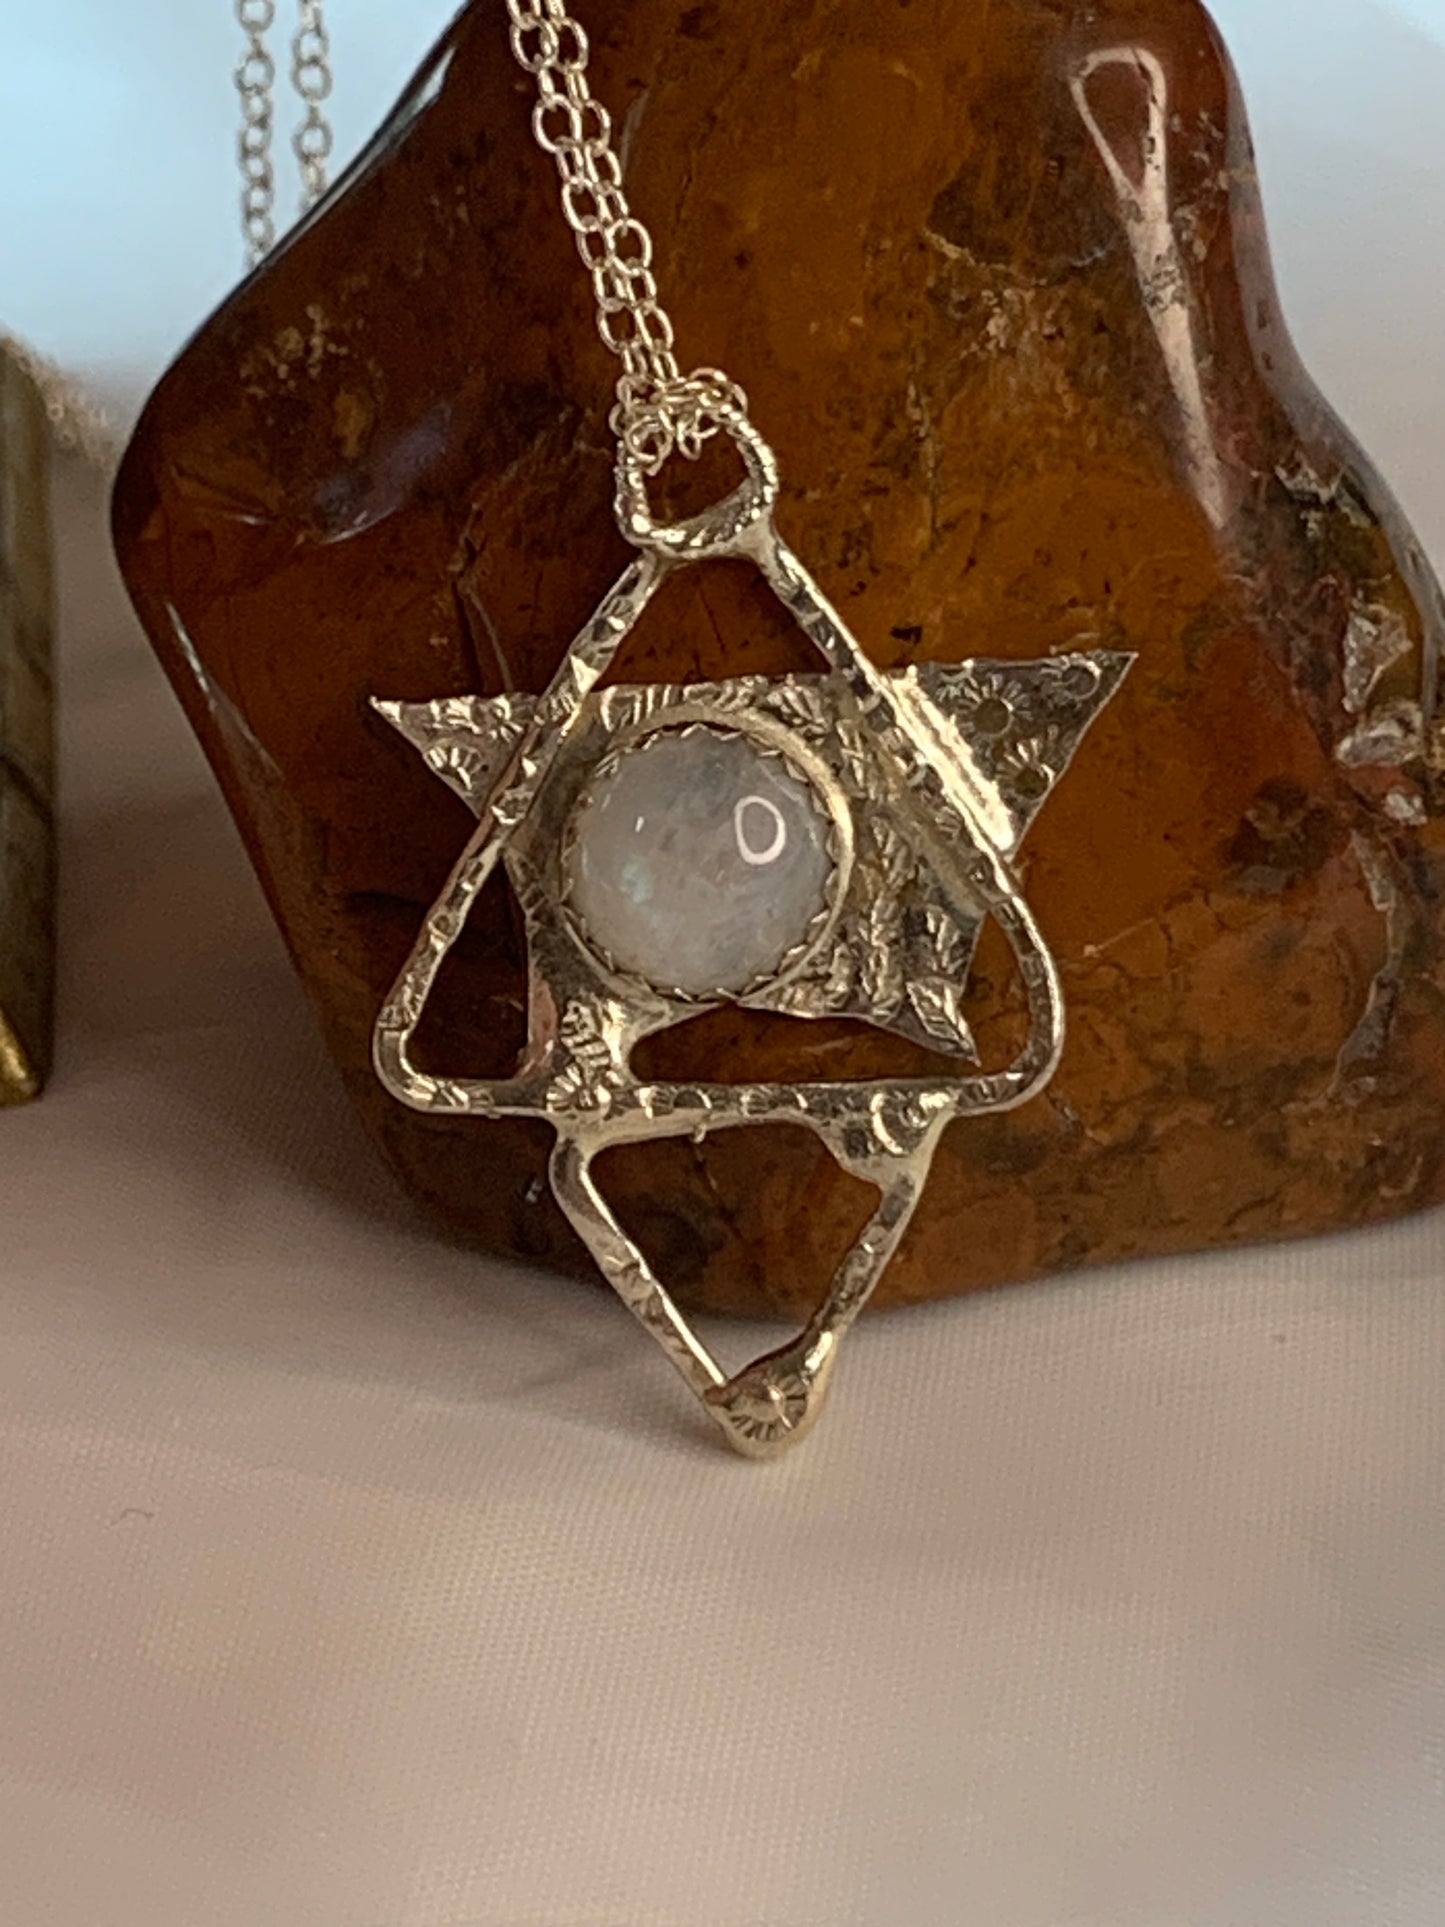 The pendant features a fusion of geometric shapes, creating a unique star pyramid or triangle design, all handcrafted from sterling silver. At its heart lies a luminous Moonstone gemstone, renowned for its enchanting play of colors and its connection to feminine energy and intuition.